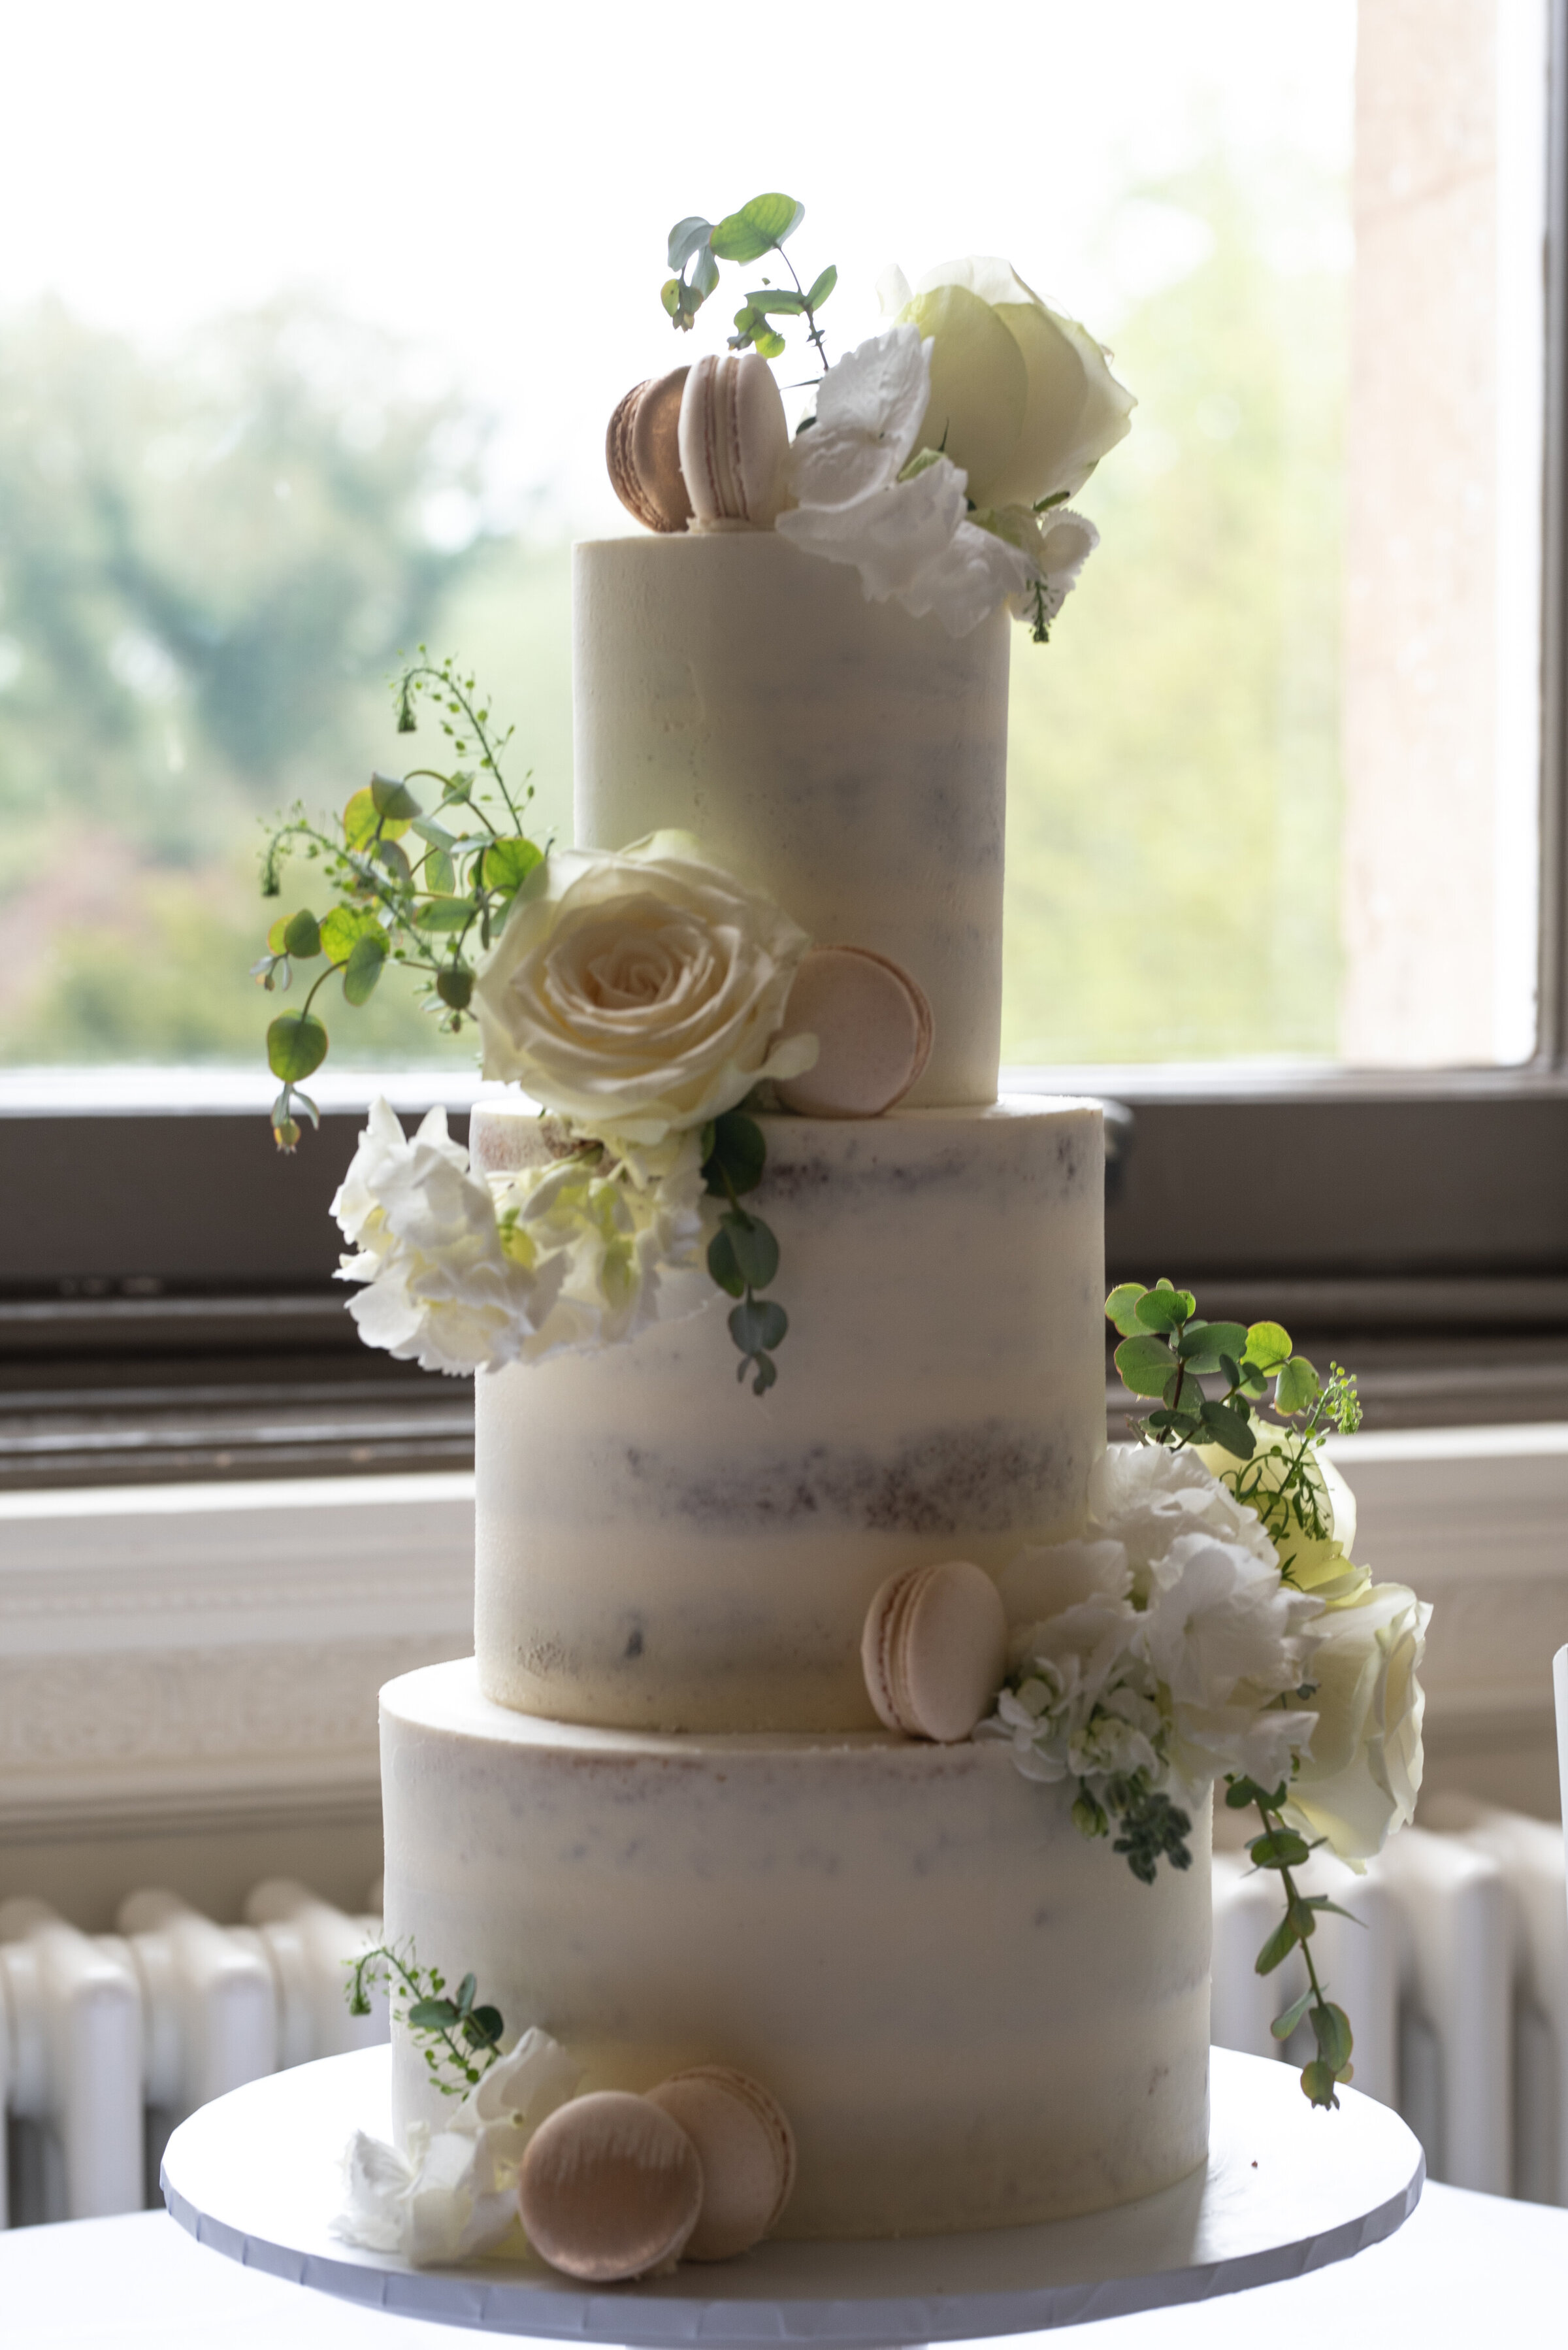 Three tier wedding cake with matching macaroons and flowers